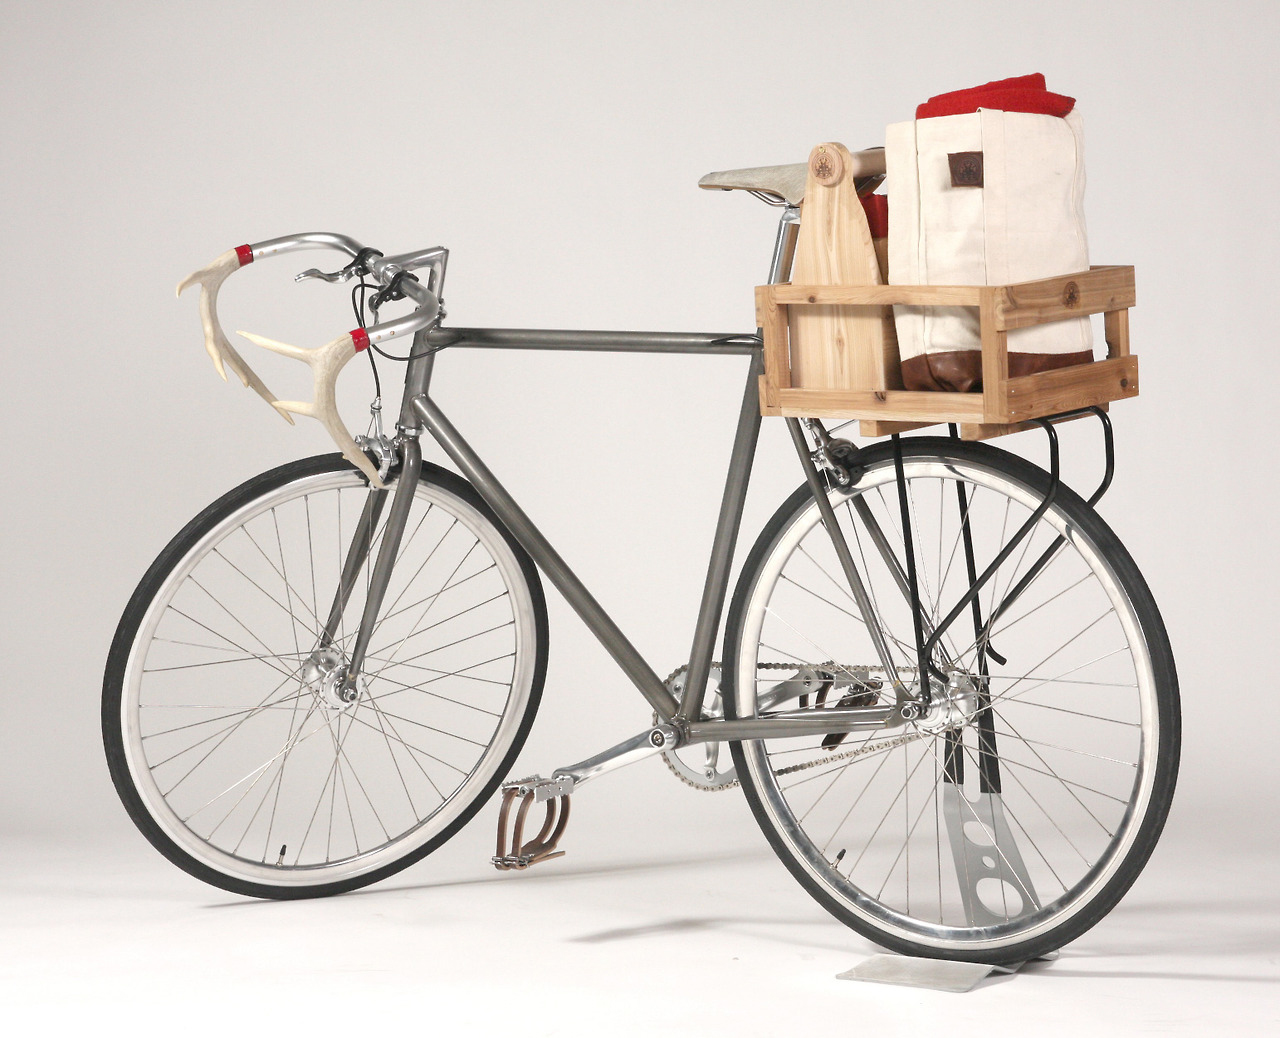  Lumburr Co Bicycle with six-pack holder, crate and antler handlebars 